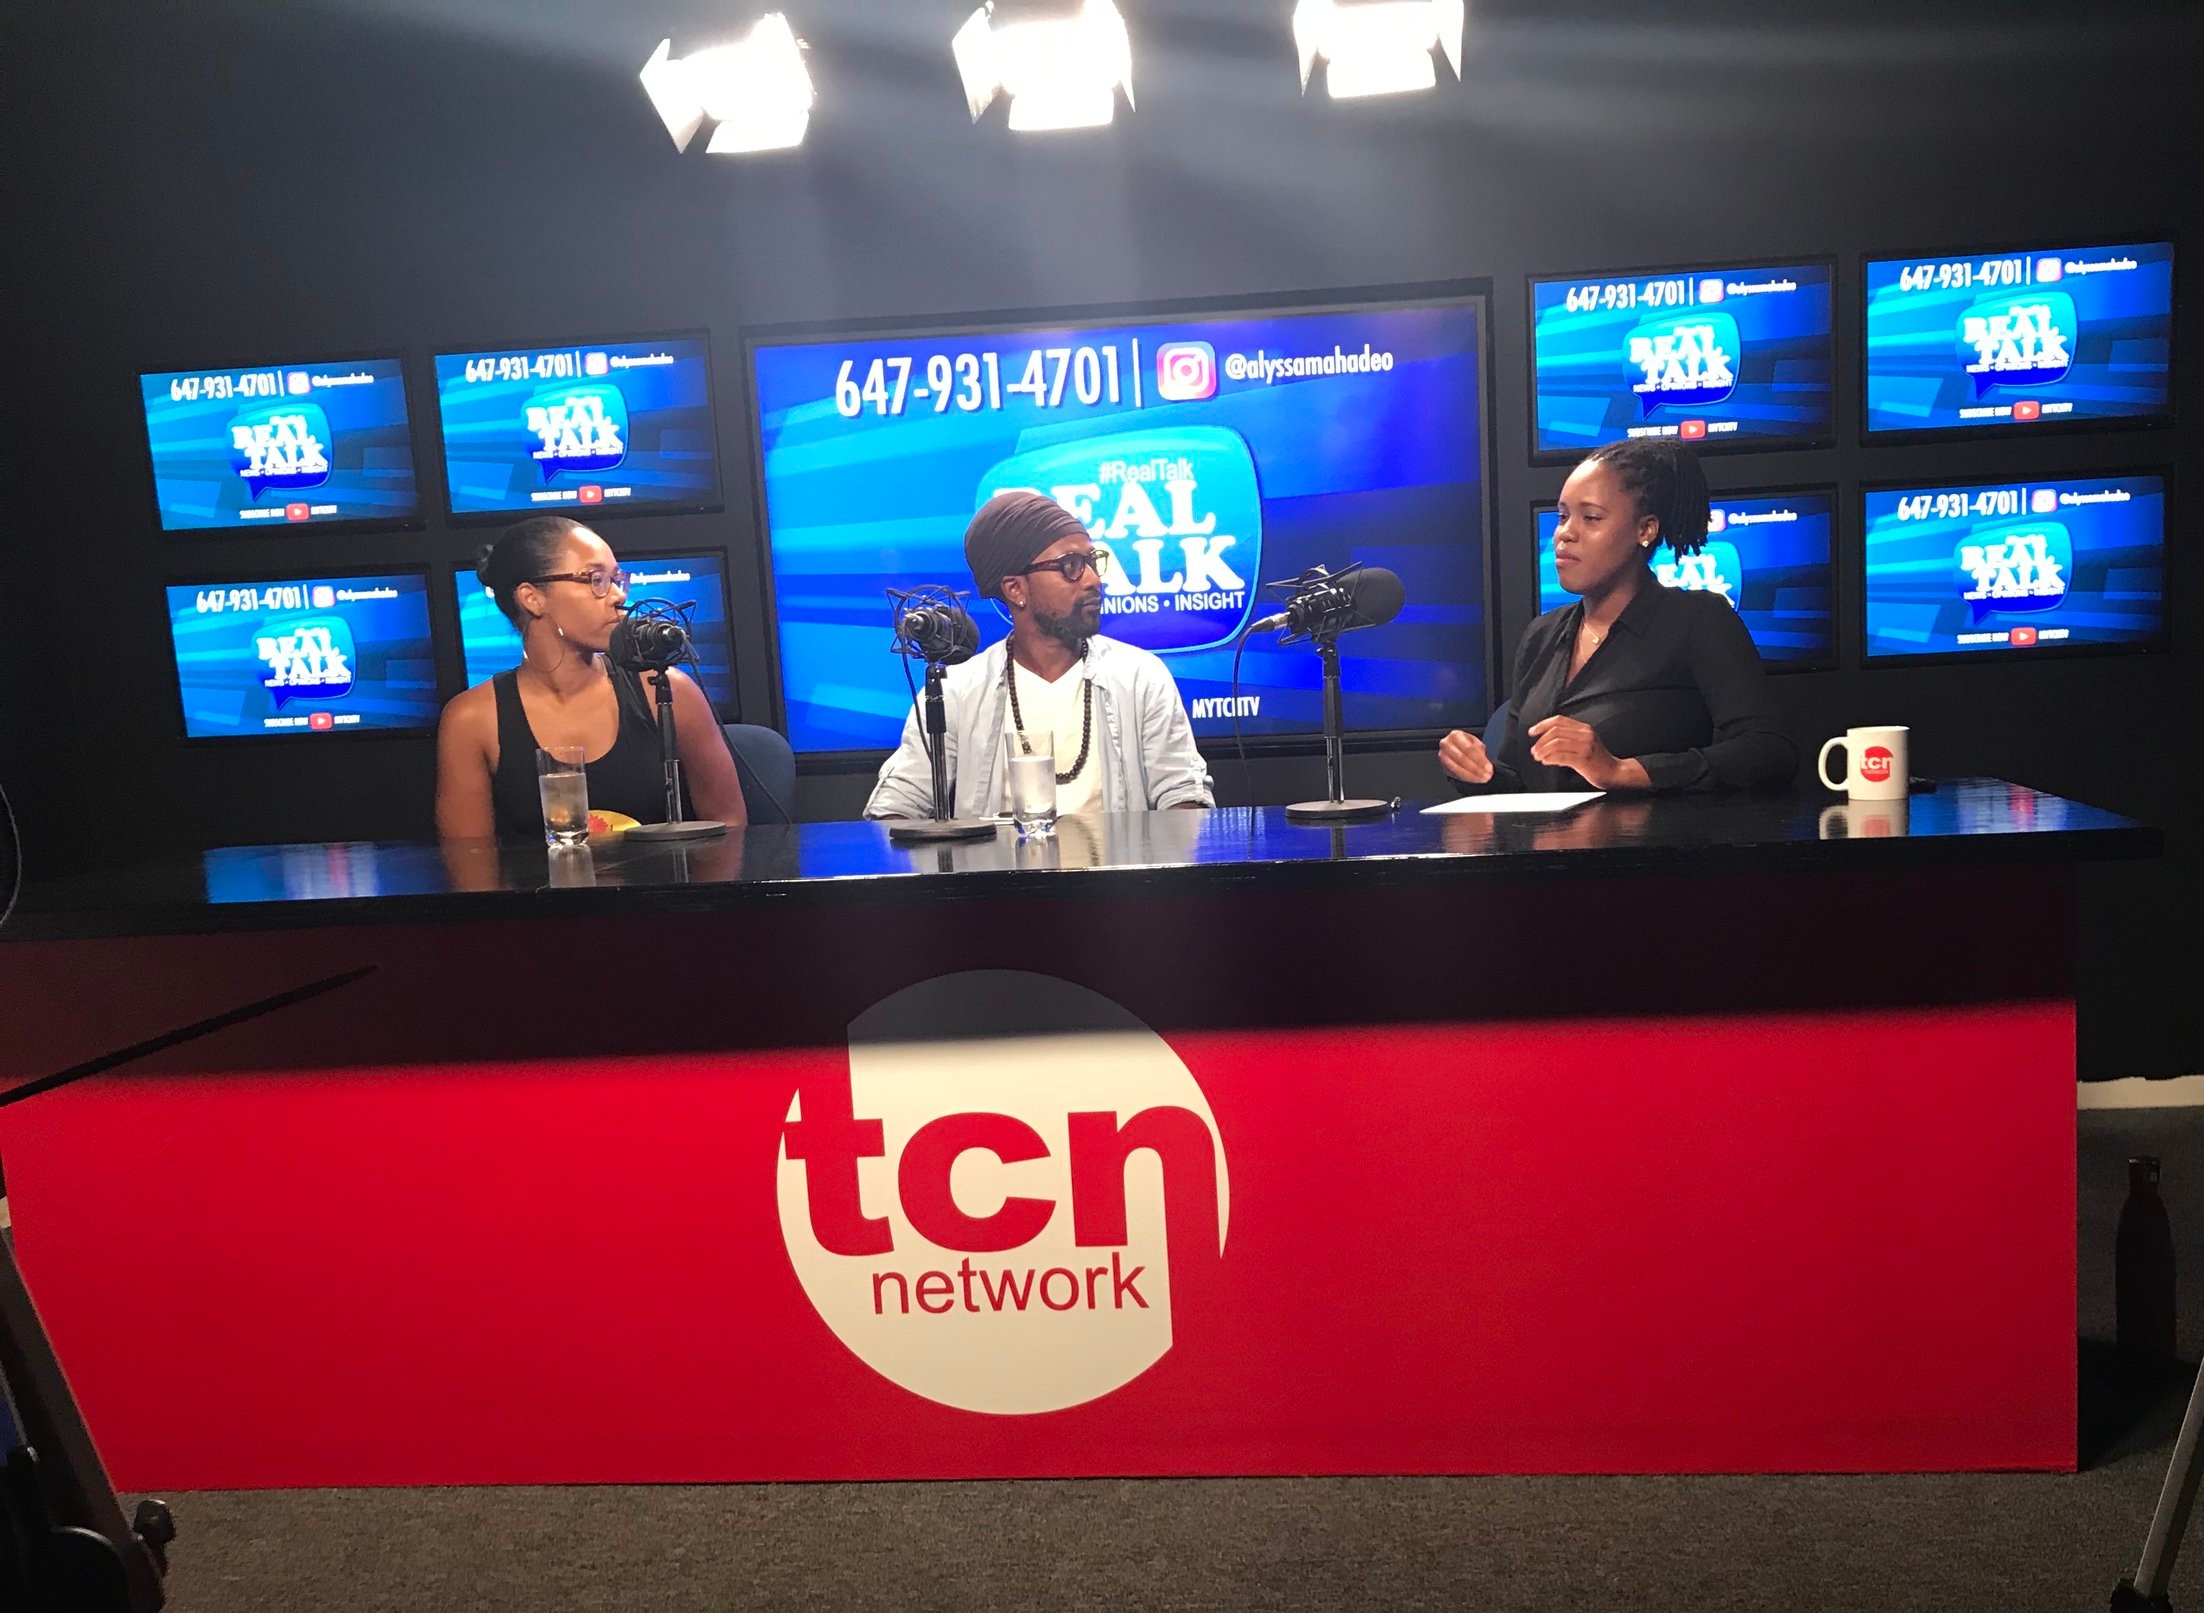 tcn interview - my story